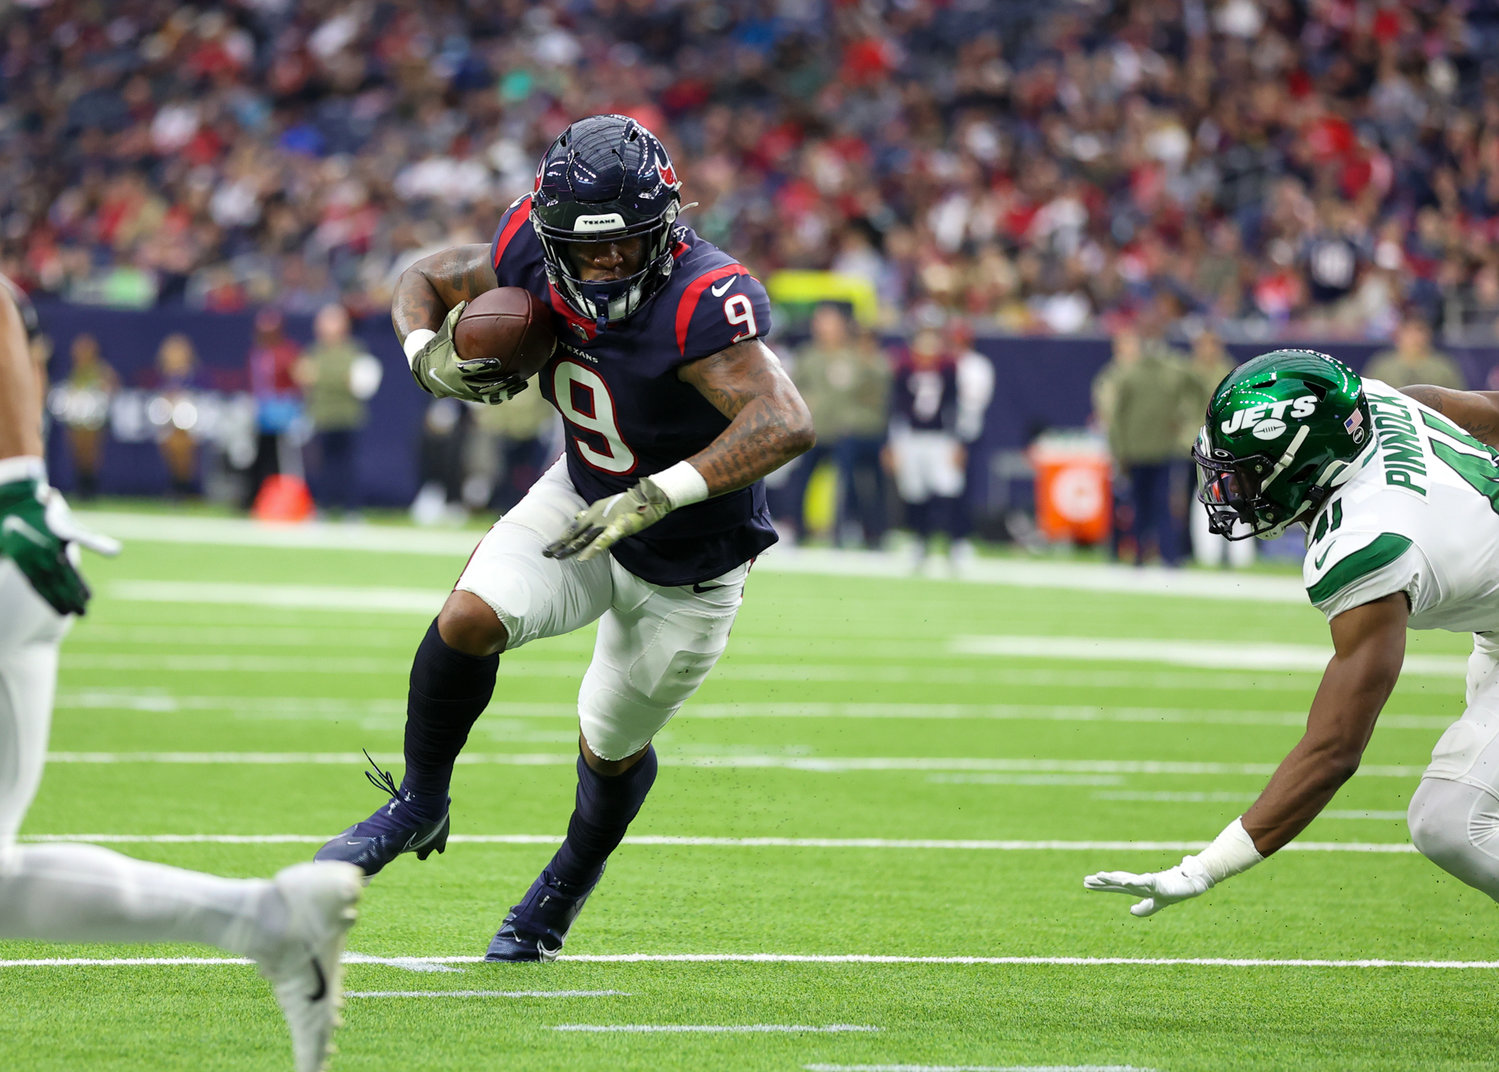 Houston Texans tight end Brevin Jordan (9) carries the ball for a touchdown on a 13-yard touchdown reception during an NFL game between the Houston Texans and the New York Jets on November 28, 2021 in Houston, Texas. The Jets won, 21-14